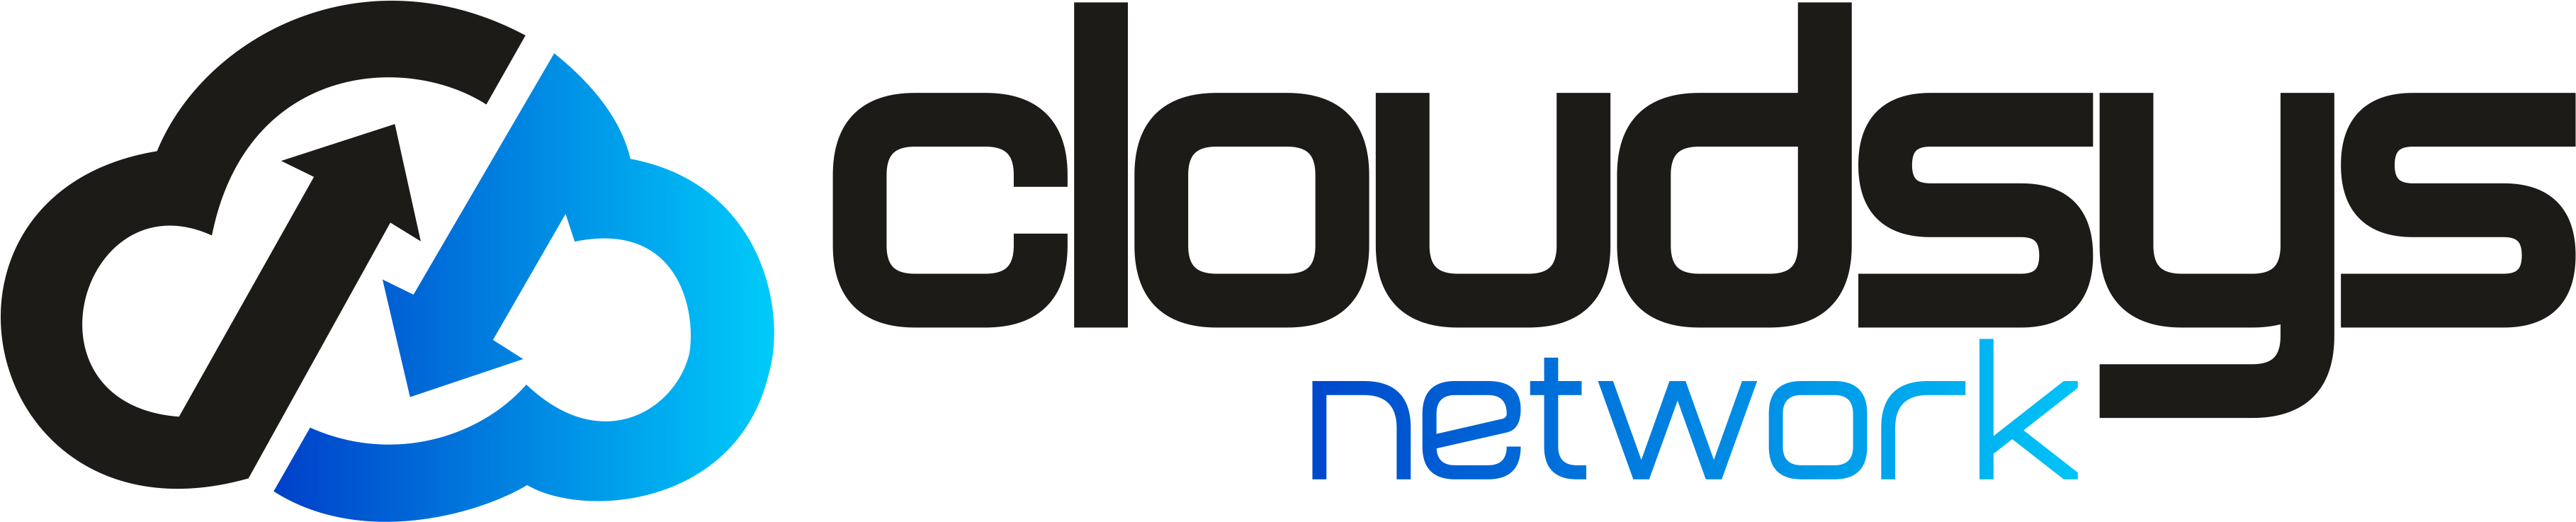 Cloudsys Network | India's Best Web Development and Hosting Company